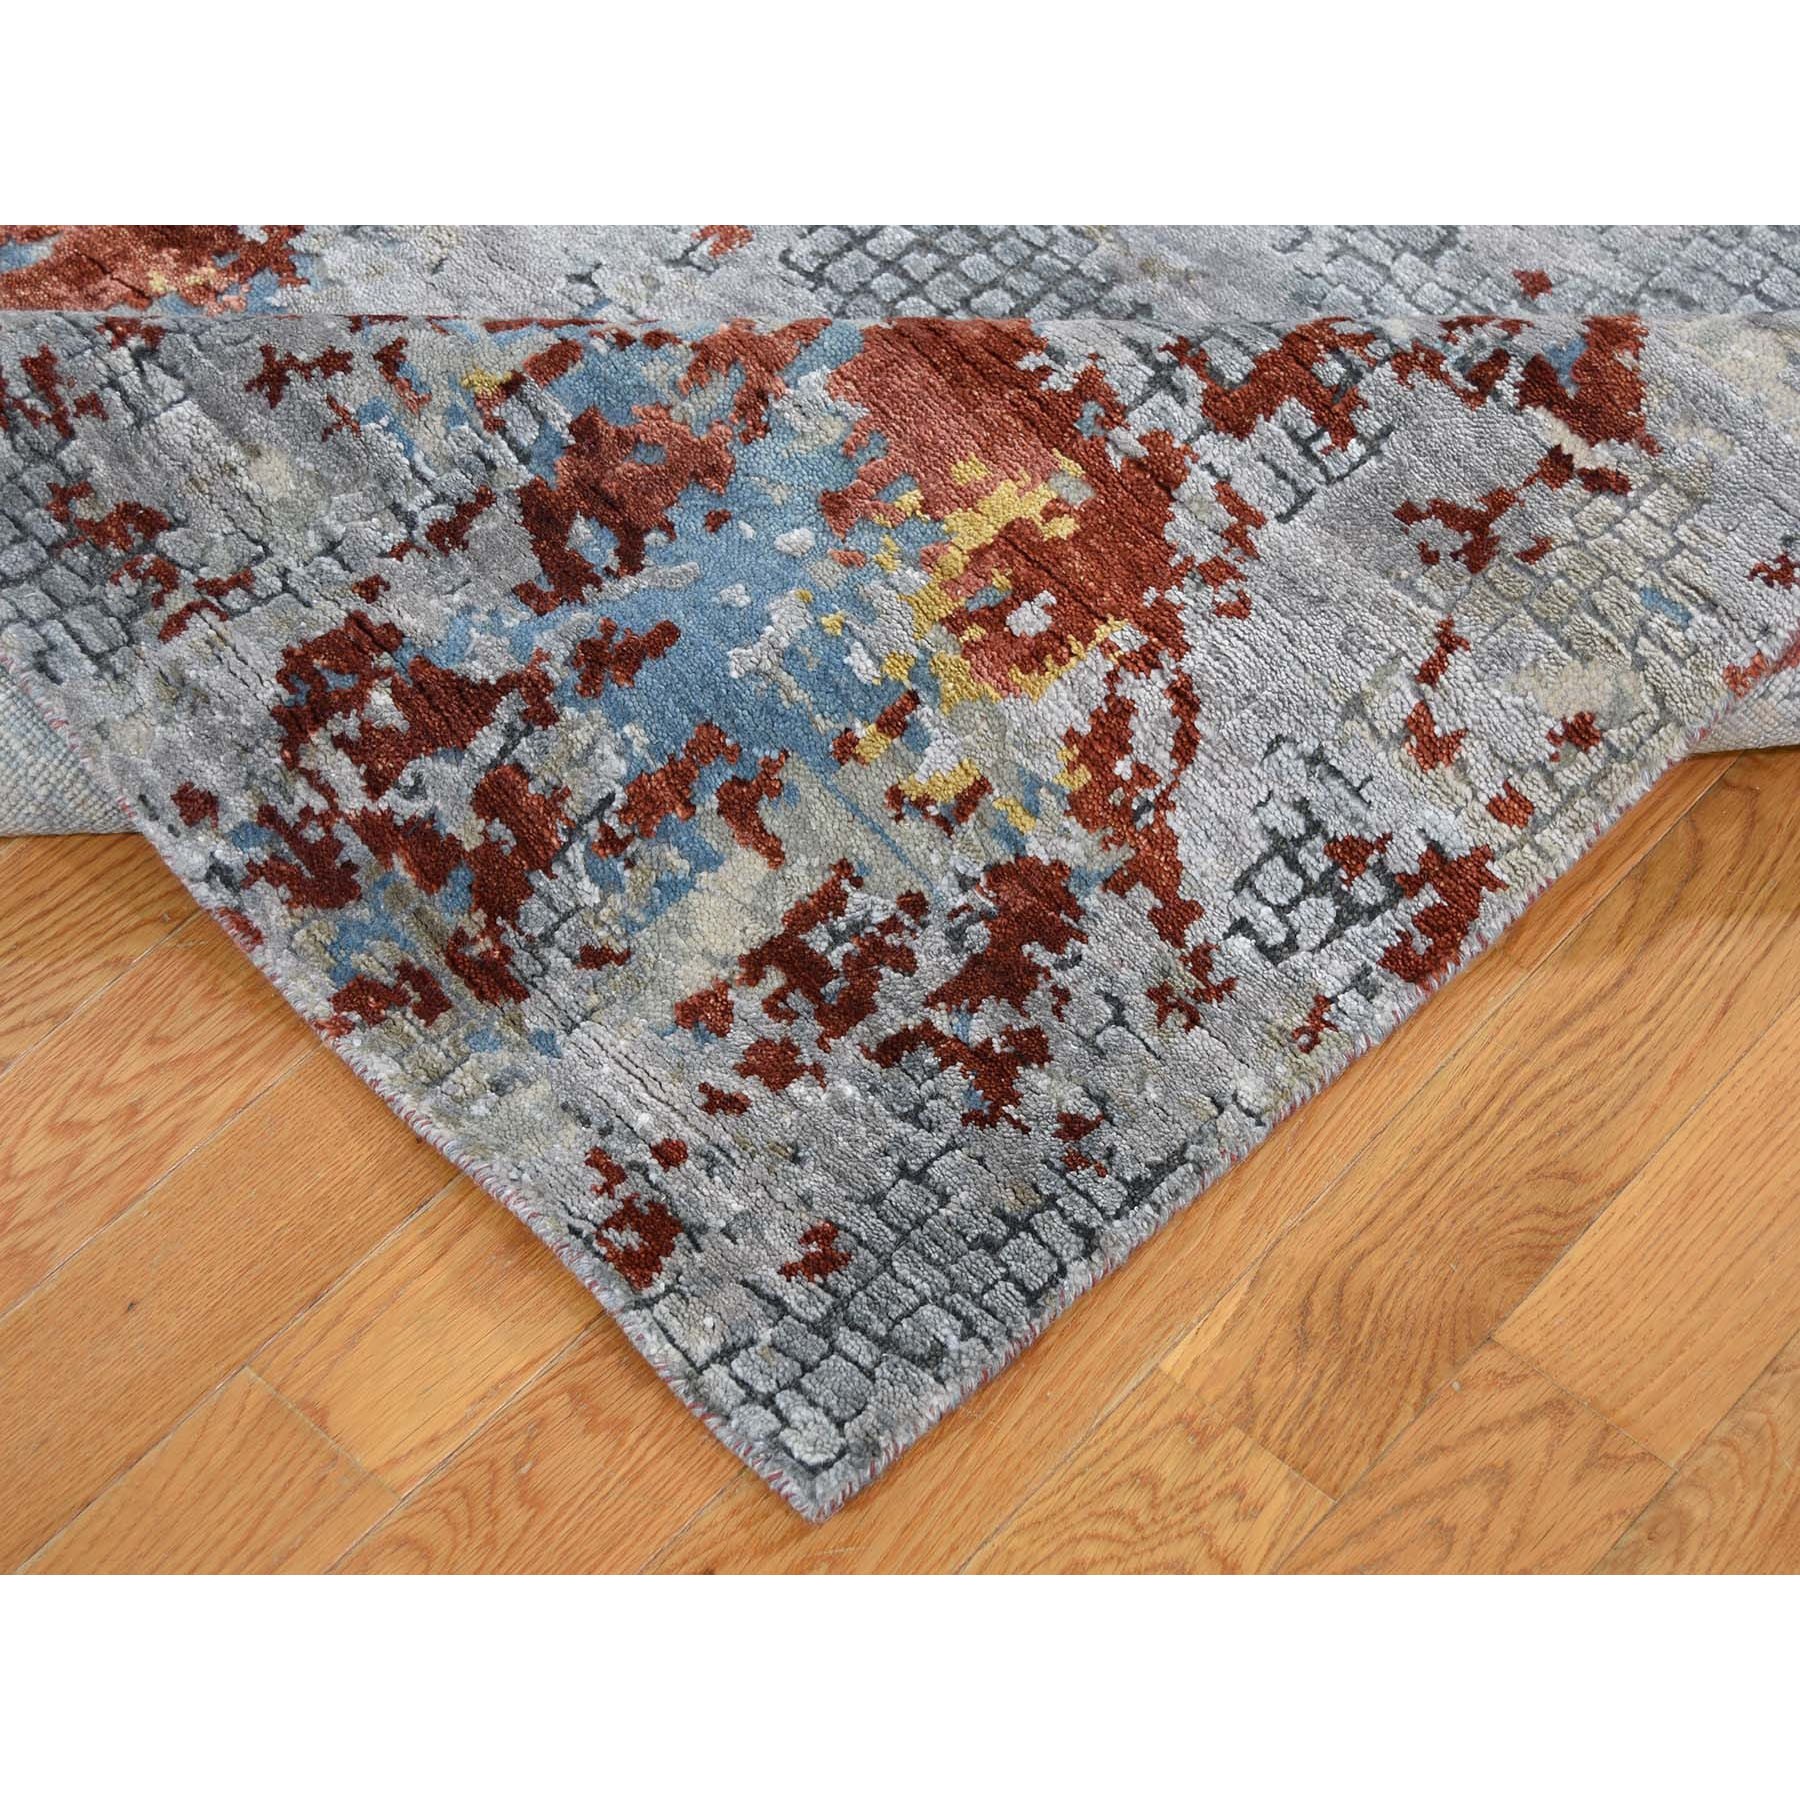 5-x8- Wool And Silk Abstract With Fire Mosaic Design Hand-Knotted Oriental Rug 